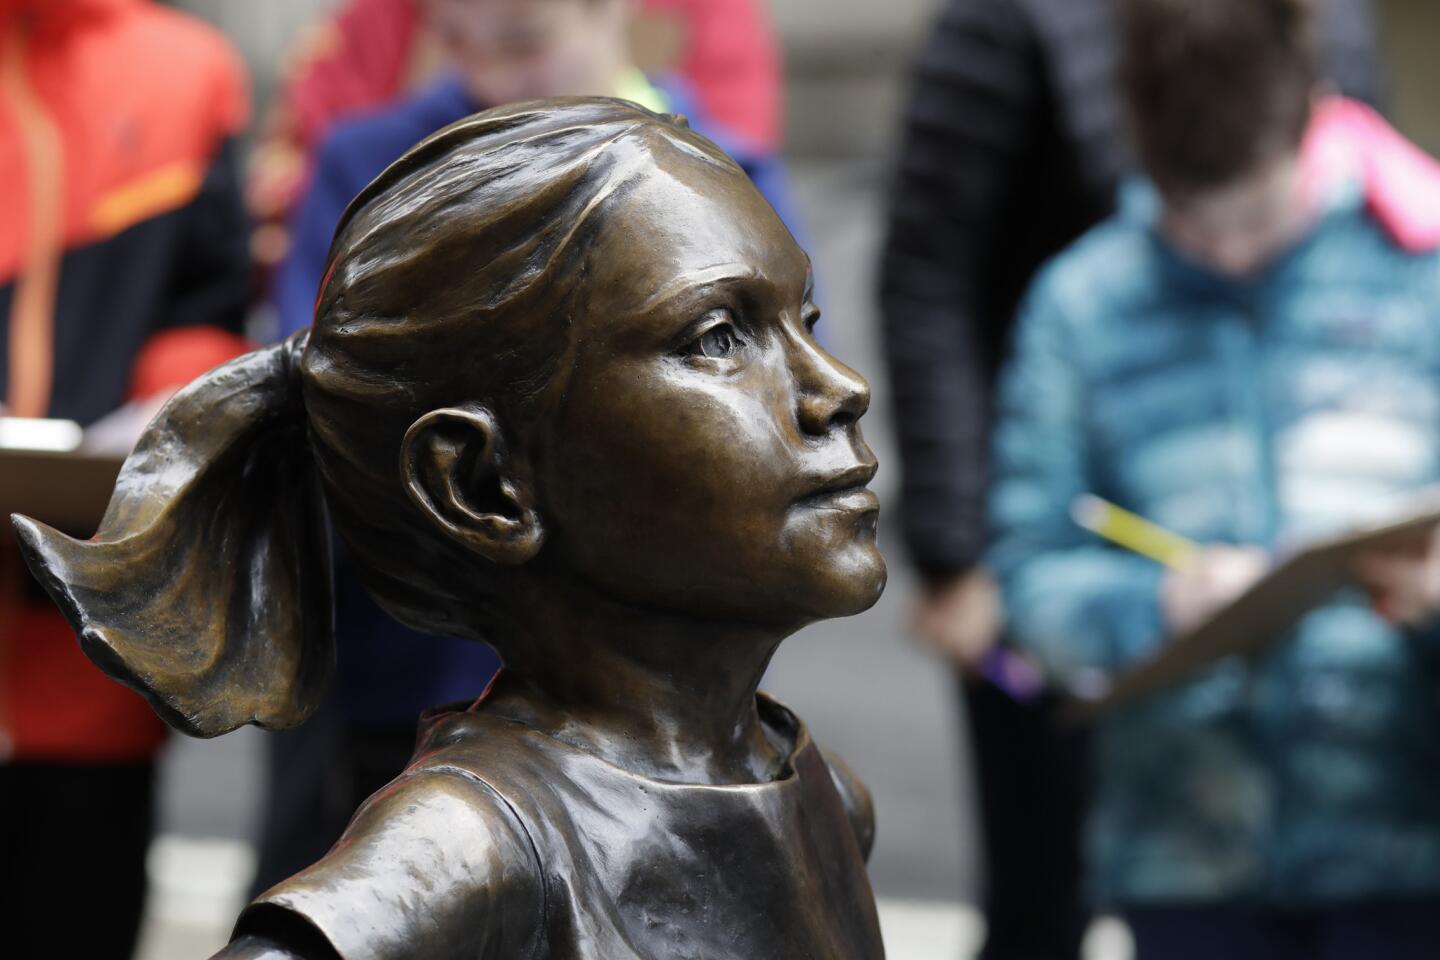 Face of The Fearless Girl statue